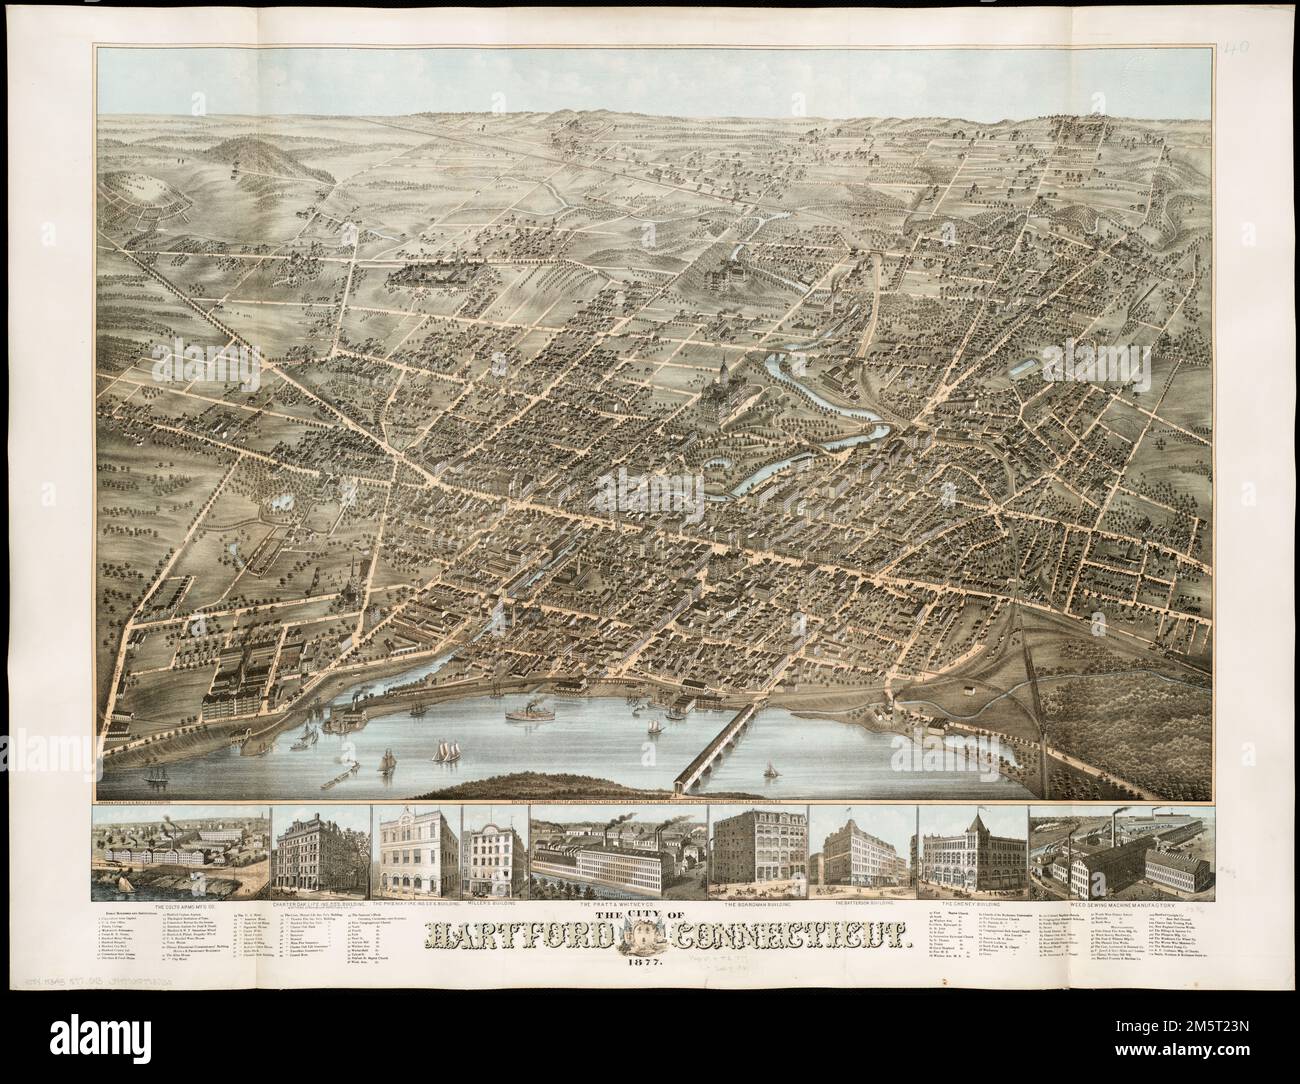 The city of Hartford Connecticut : 1877. Bird's-eye view. Includes ill. and index to points of interest.. America Transformed: For several decades following the Civil War, Hartford, Connecticut ranked as the richest city in the nation. As the headquarters for numerous insurance companies, it was known as the 'insurance capital of the world.' The city also led the Industrial Revolution as a large producer of guns, sewing machines, and machine tools. One marginal inset illustrates the Colt Arms Manufacturing Company, which produced guns widely used during the Civil War and in later conflicts wit Stock Photo